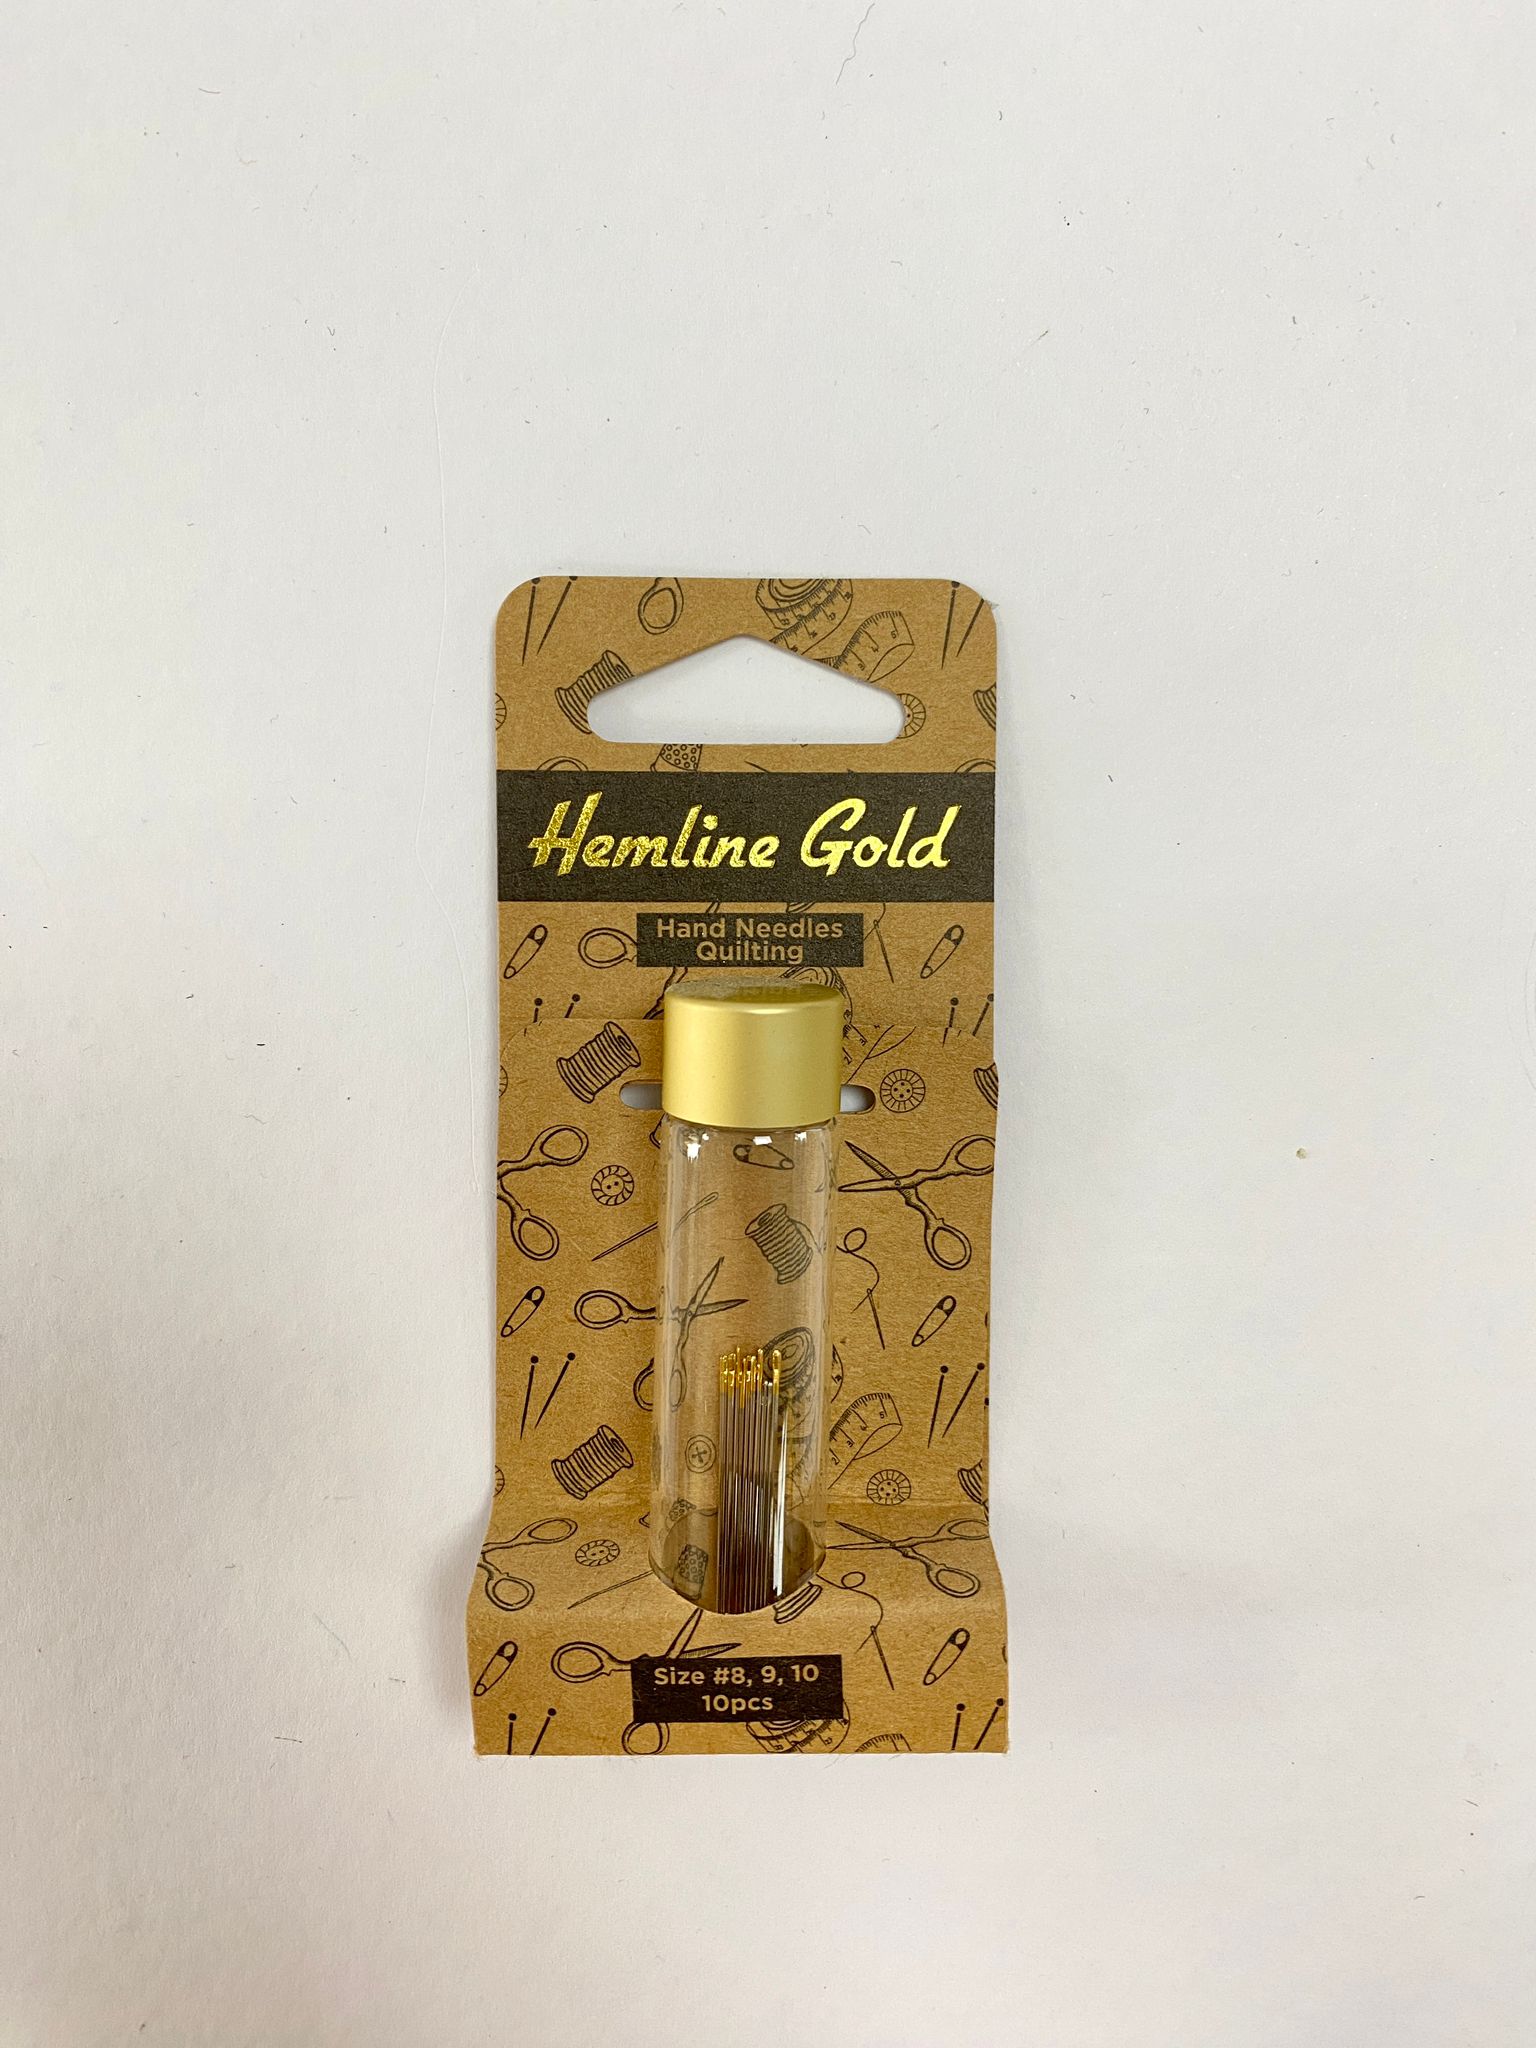 Hemline Gold Hand Needles for Quilting